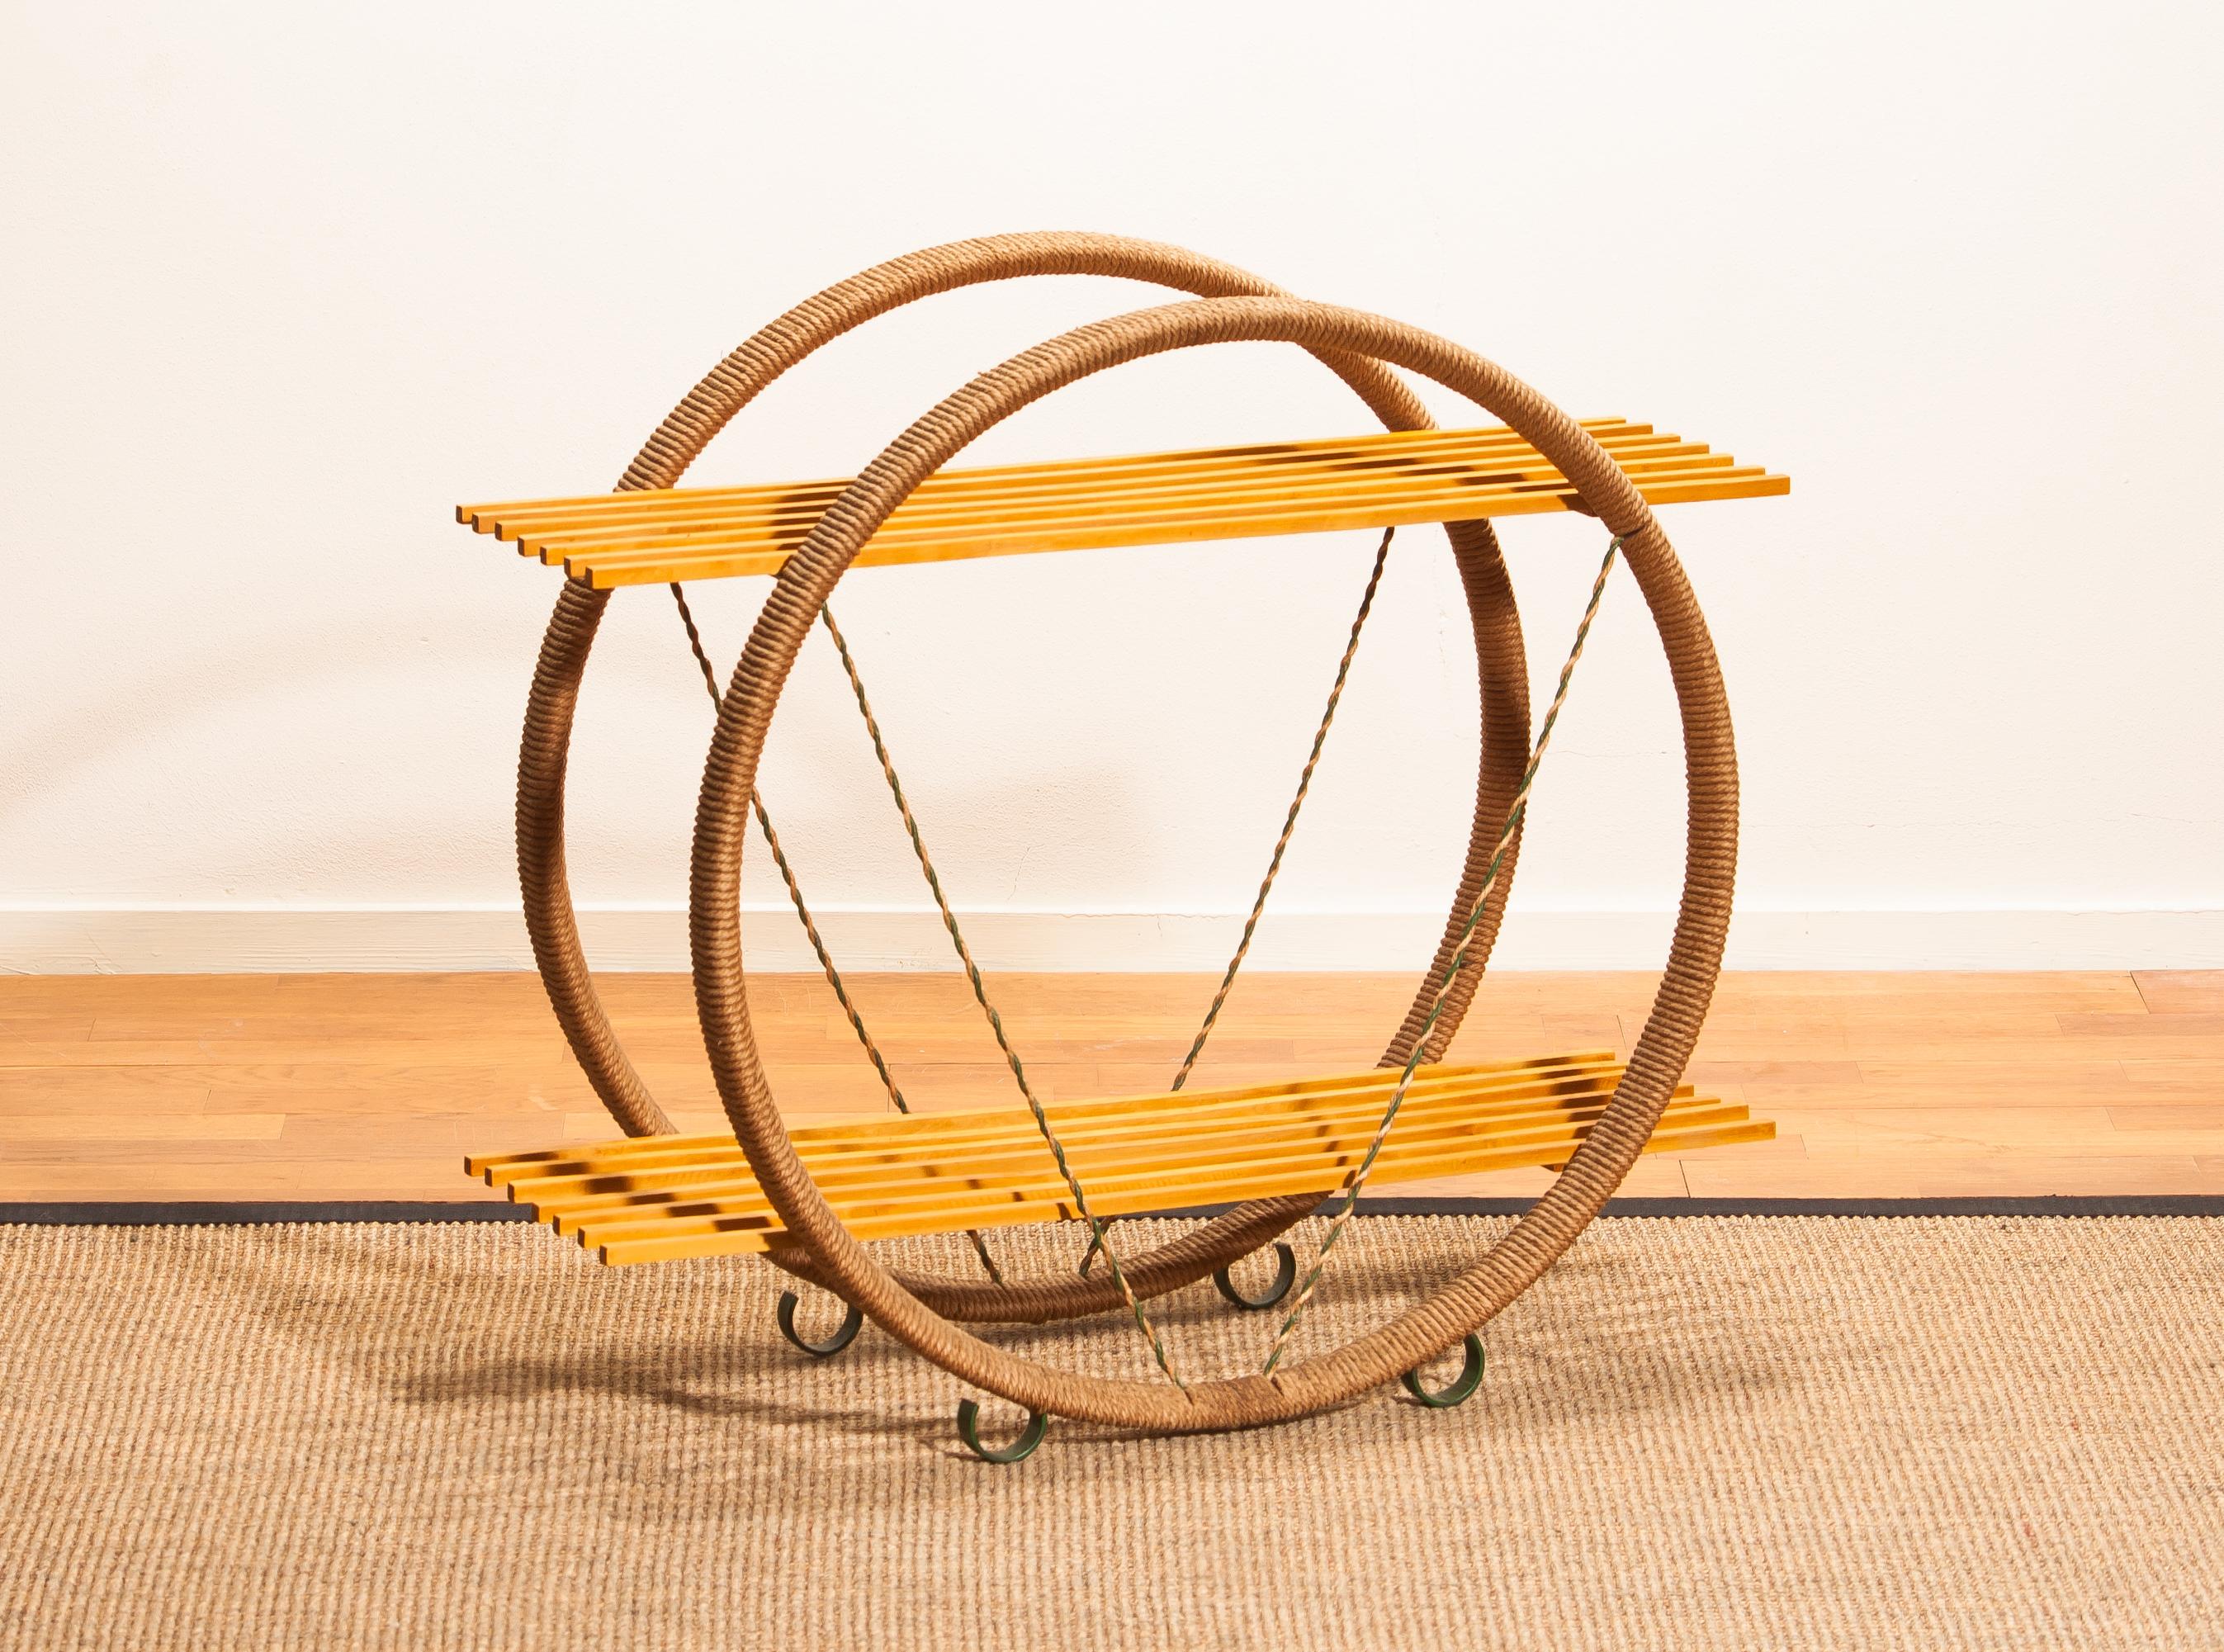 Extremely beautiful circular metal shelves cabinet wrapped with sisal/paper-cord.
This rare cabinet is made in Sweden.
Period 1940s
The dimensions are:
Total height 66 cm - 26 inch
Wide 74 cm - 29 inch
Depth 31 cm - 12 inch
ø of the circles are 64